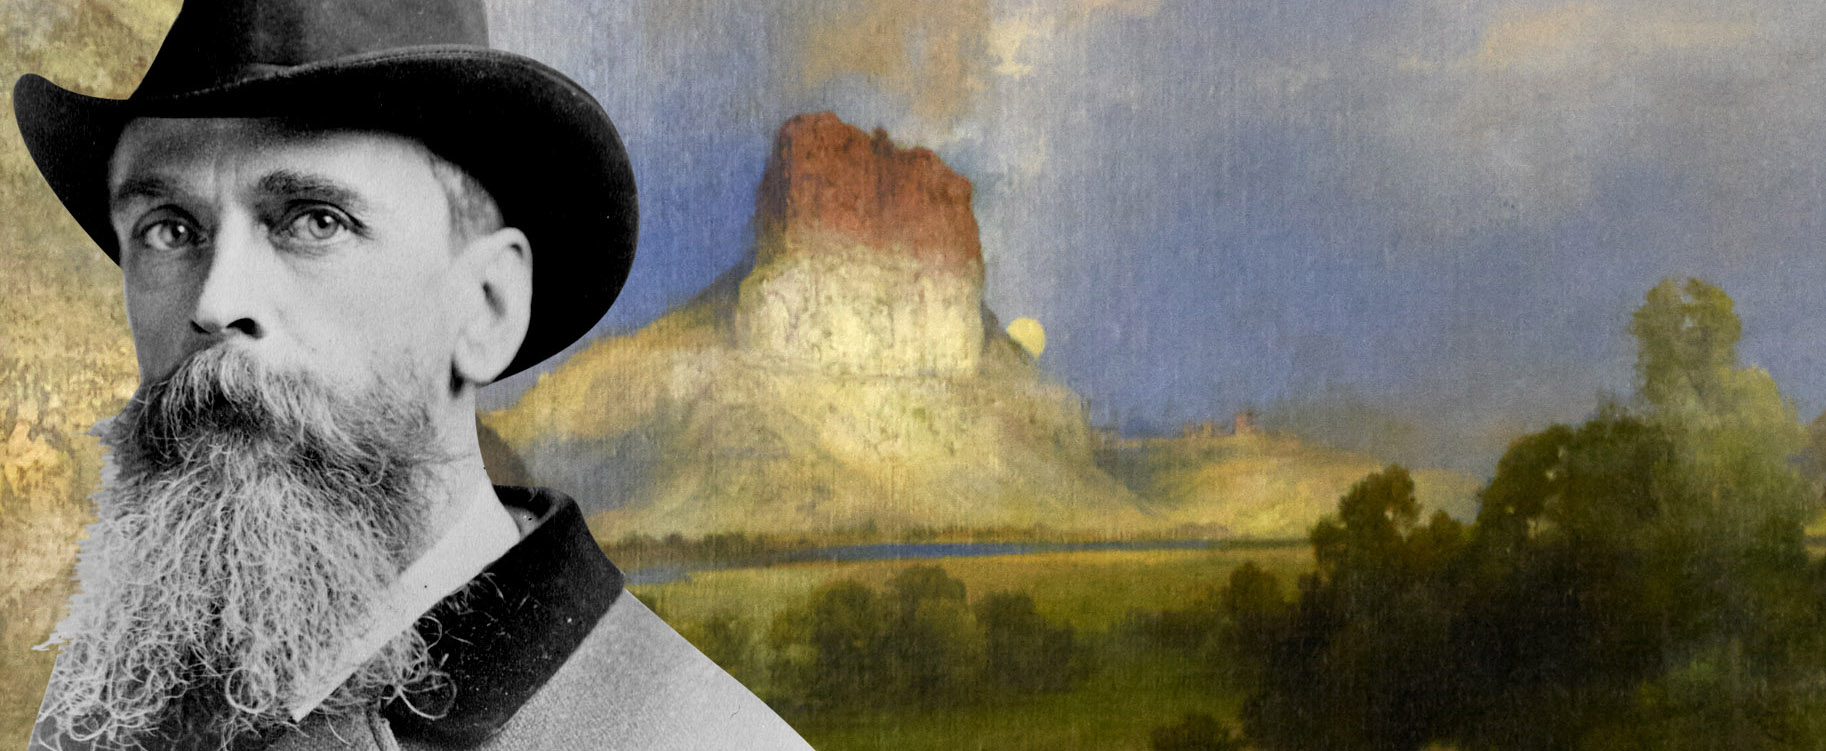 Image banner with Portrait of Thomas Moran in Foreground and painting titled Green River in the background